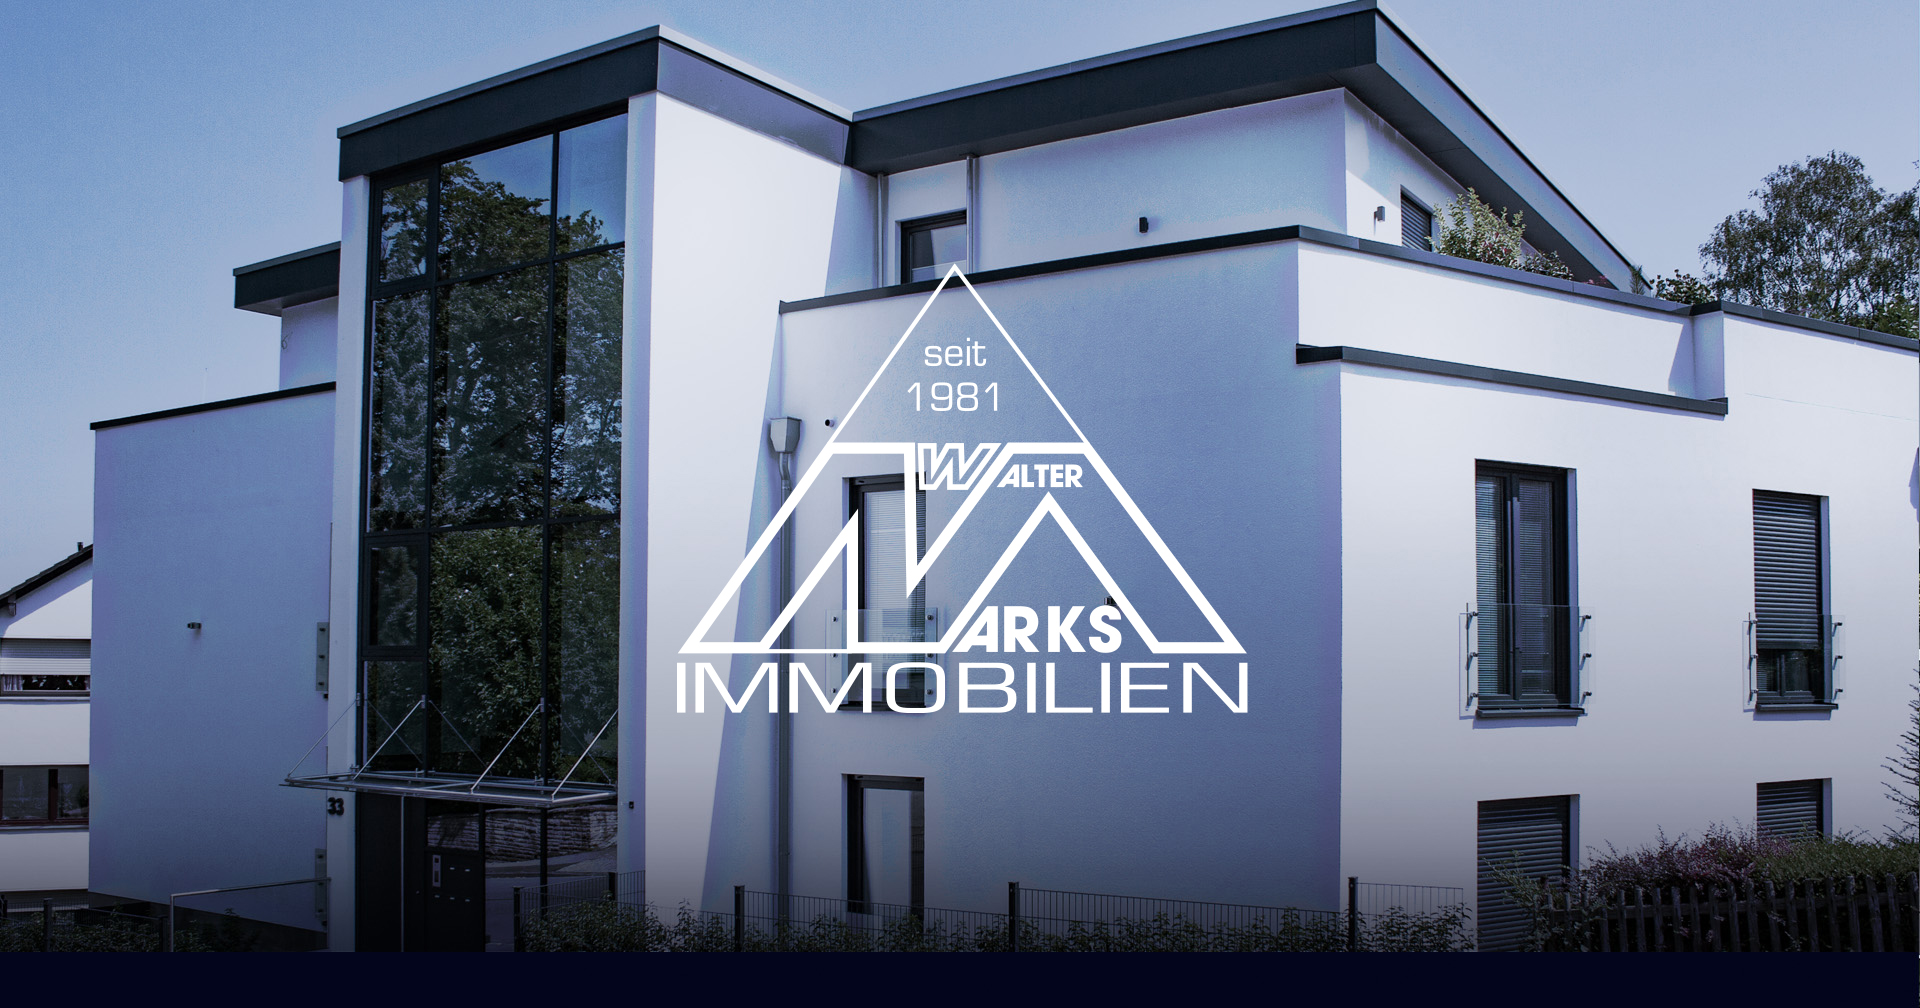 Walter Marks Immobilien